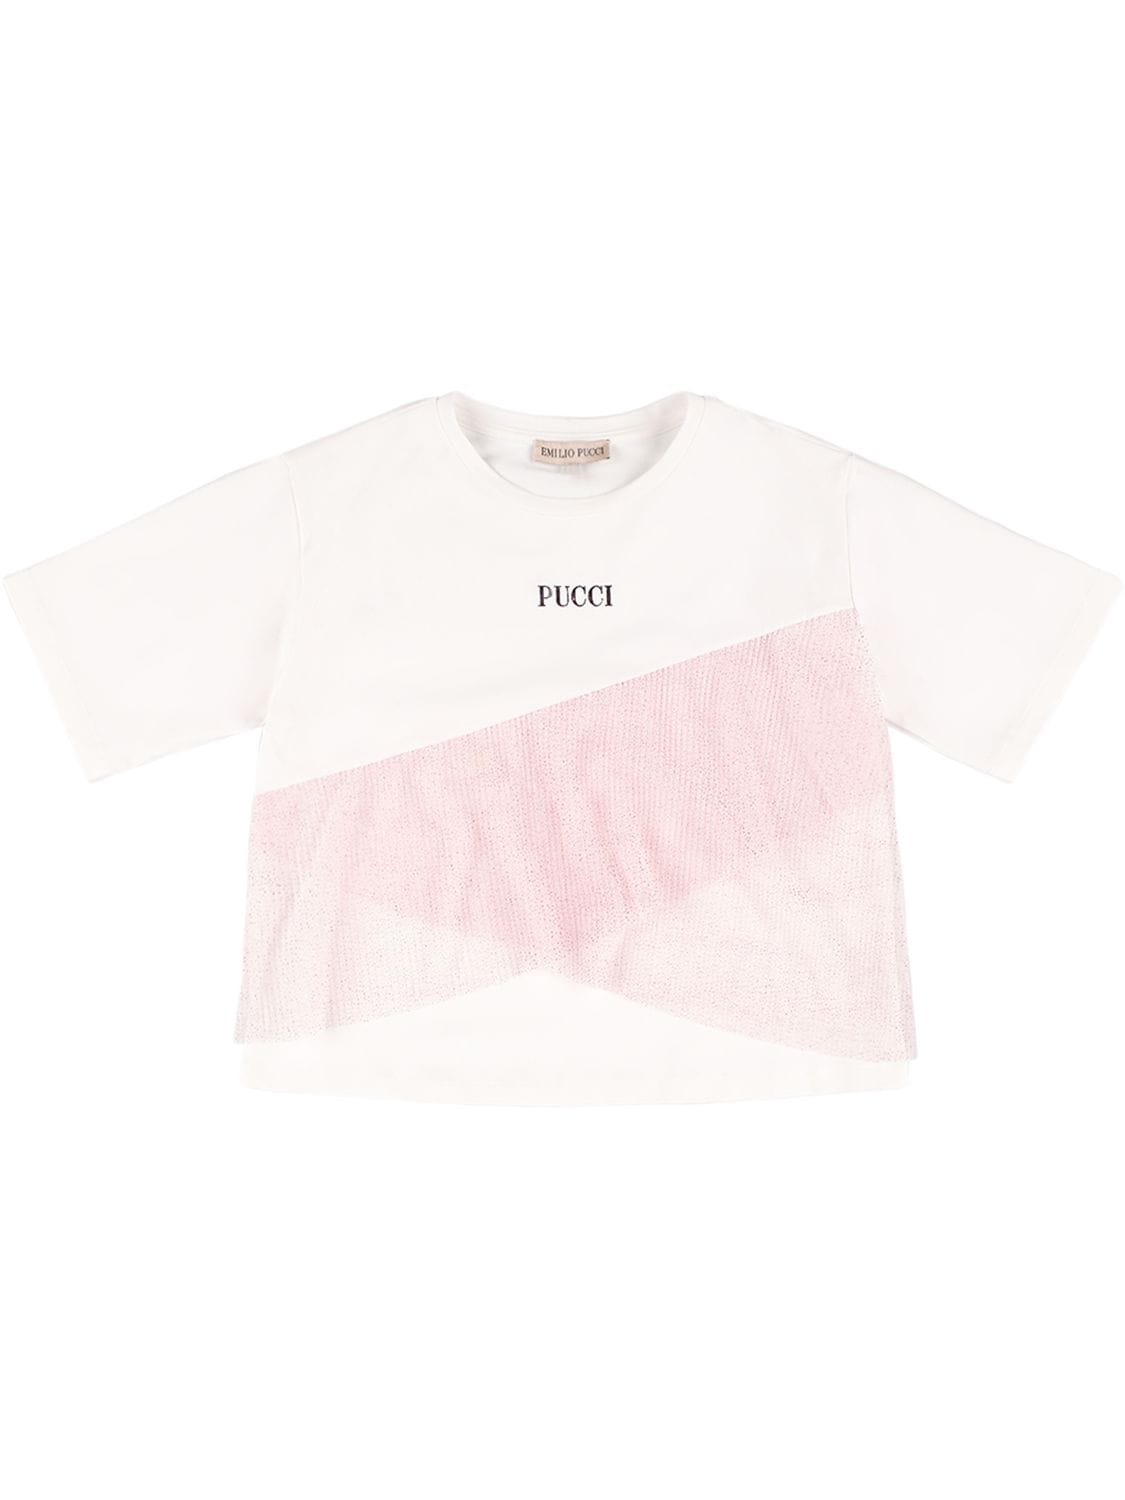 EMILIO PUCCI COTTON JERSEY T-SHIRT W/ TULLE INSERT